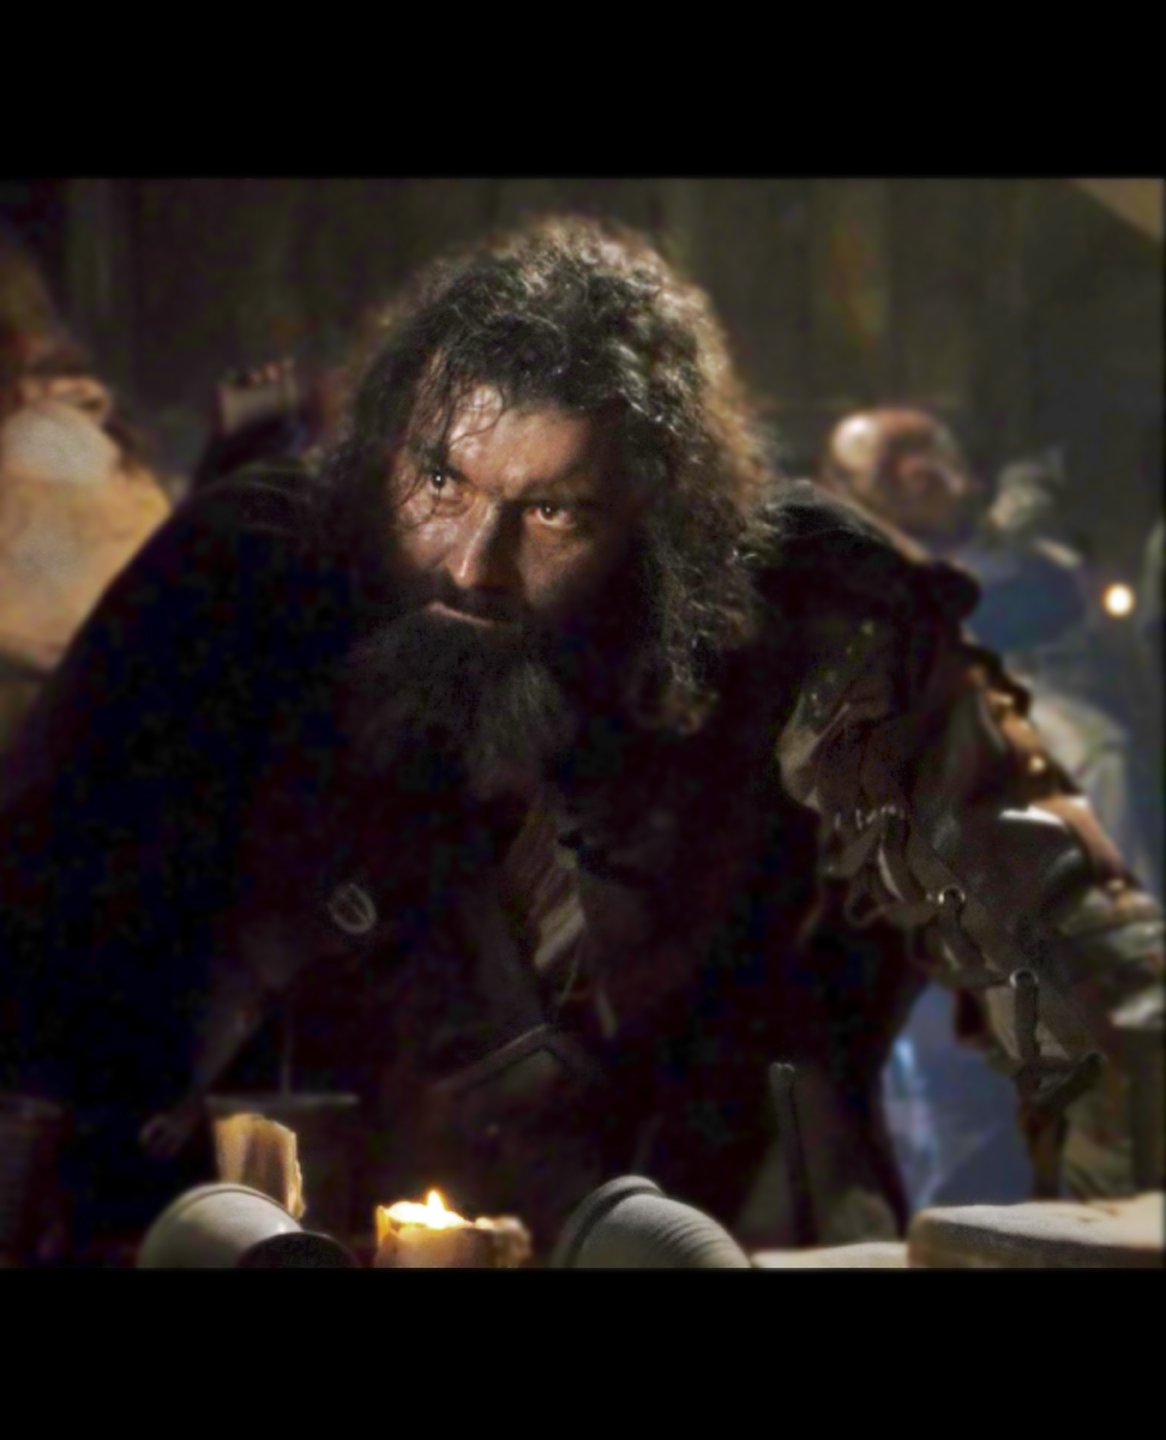 I play the ill-fated 'Garrick' in Solomon Kane opposite James Purefoy and Phil Winchester in this scene.